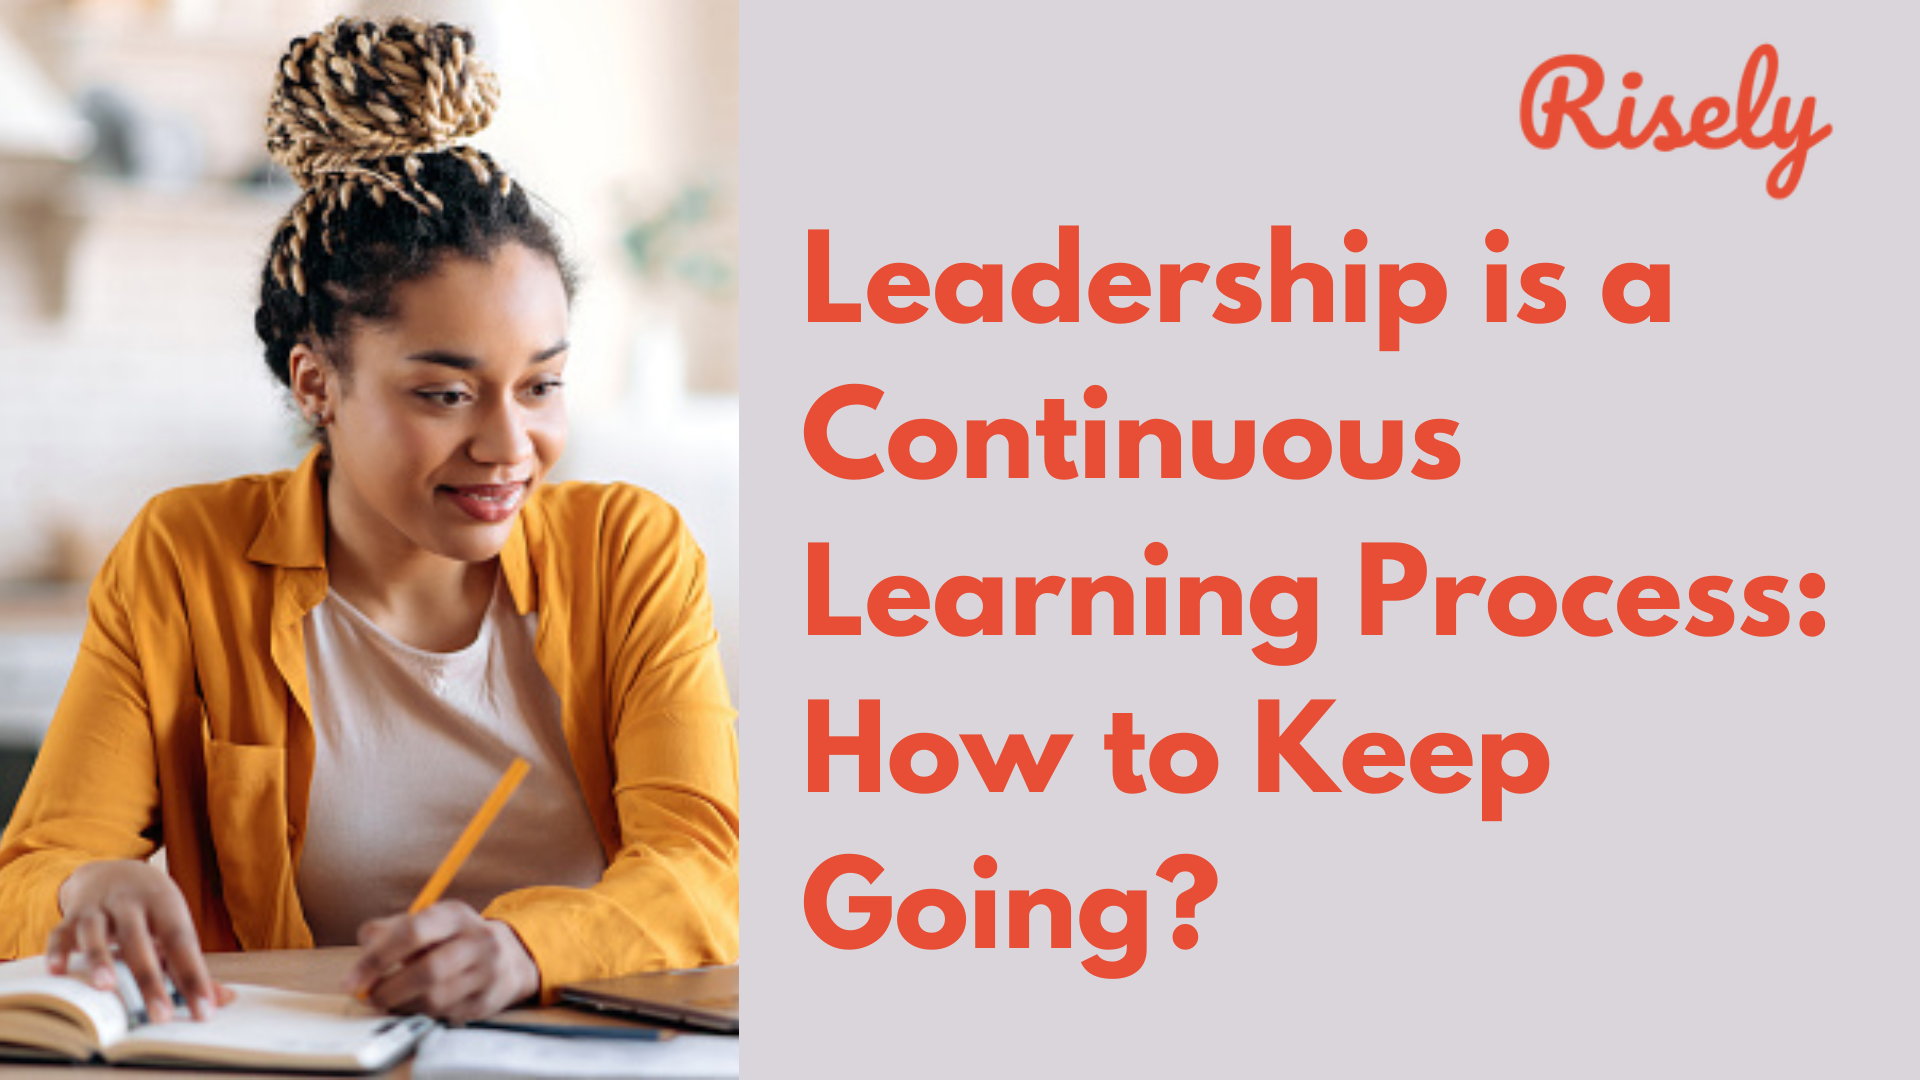 Leadership is a Continuous Learning Process